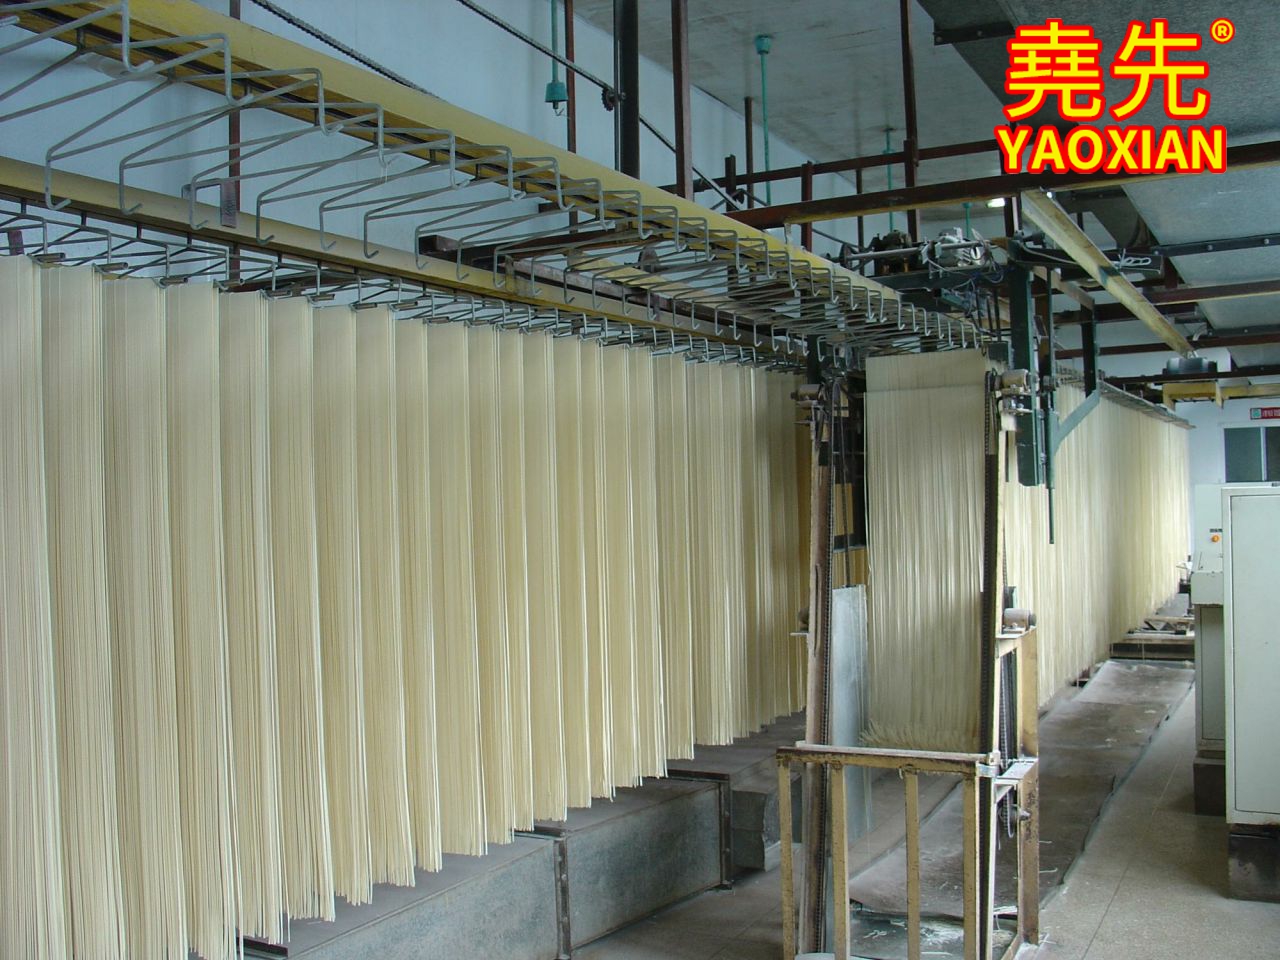 What rice noodles can be produced by the large rice noodle production line commonly used by Yaoxian Machinery